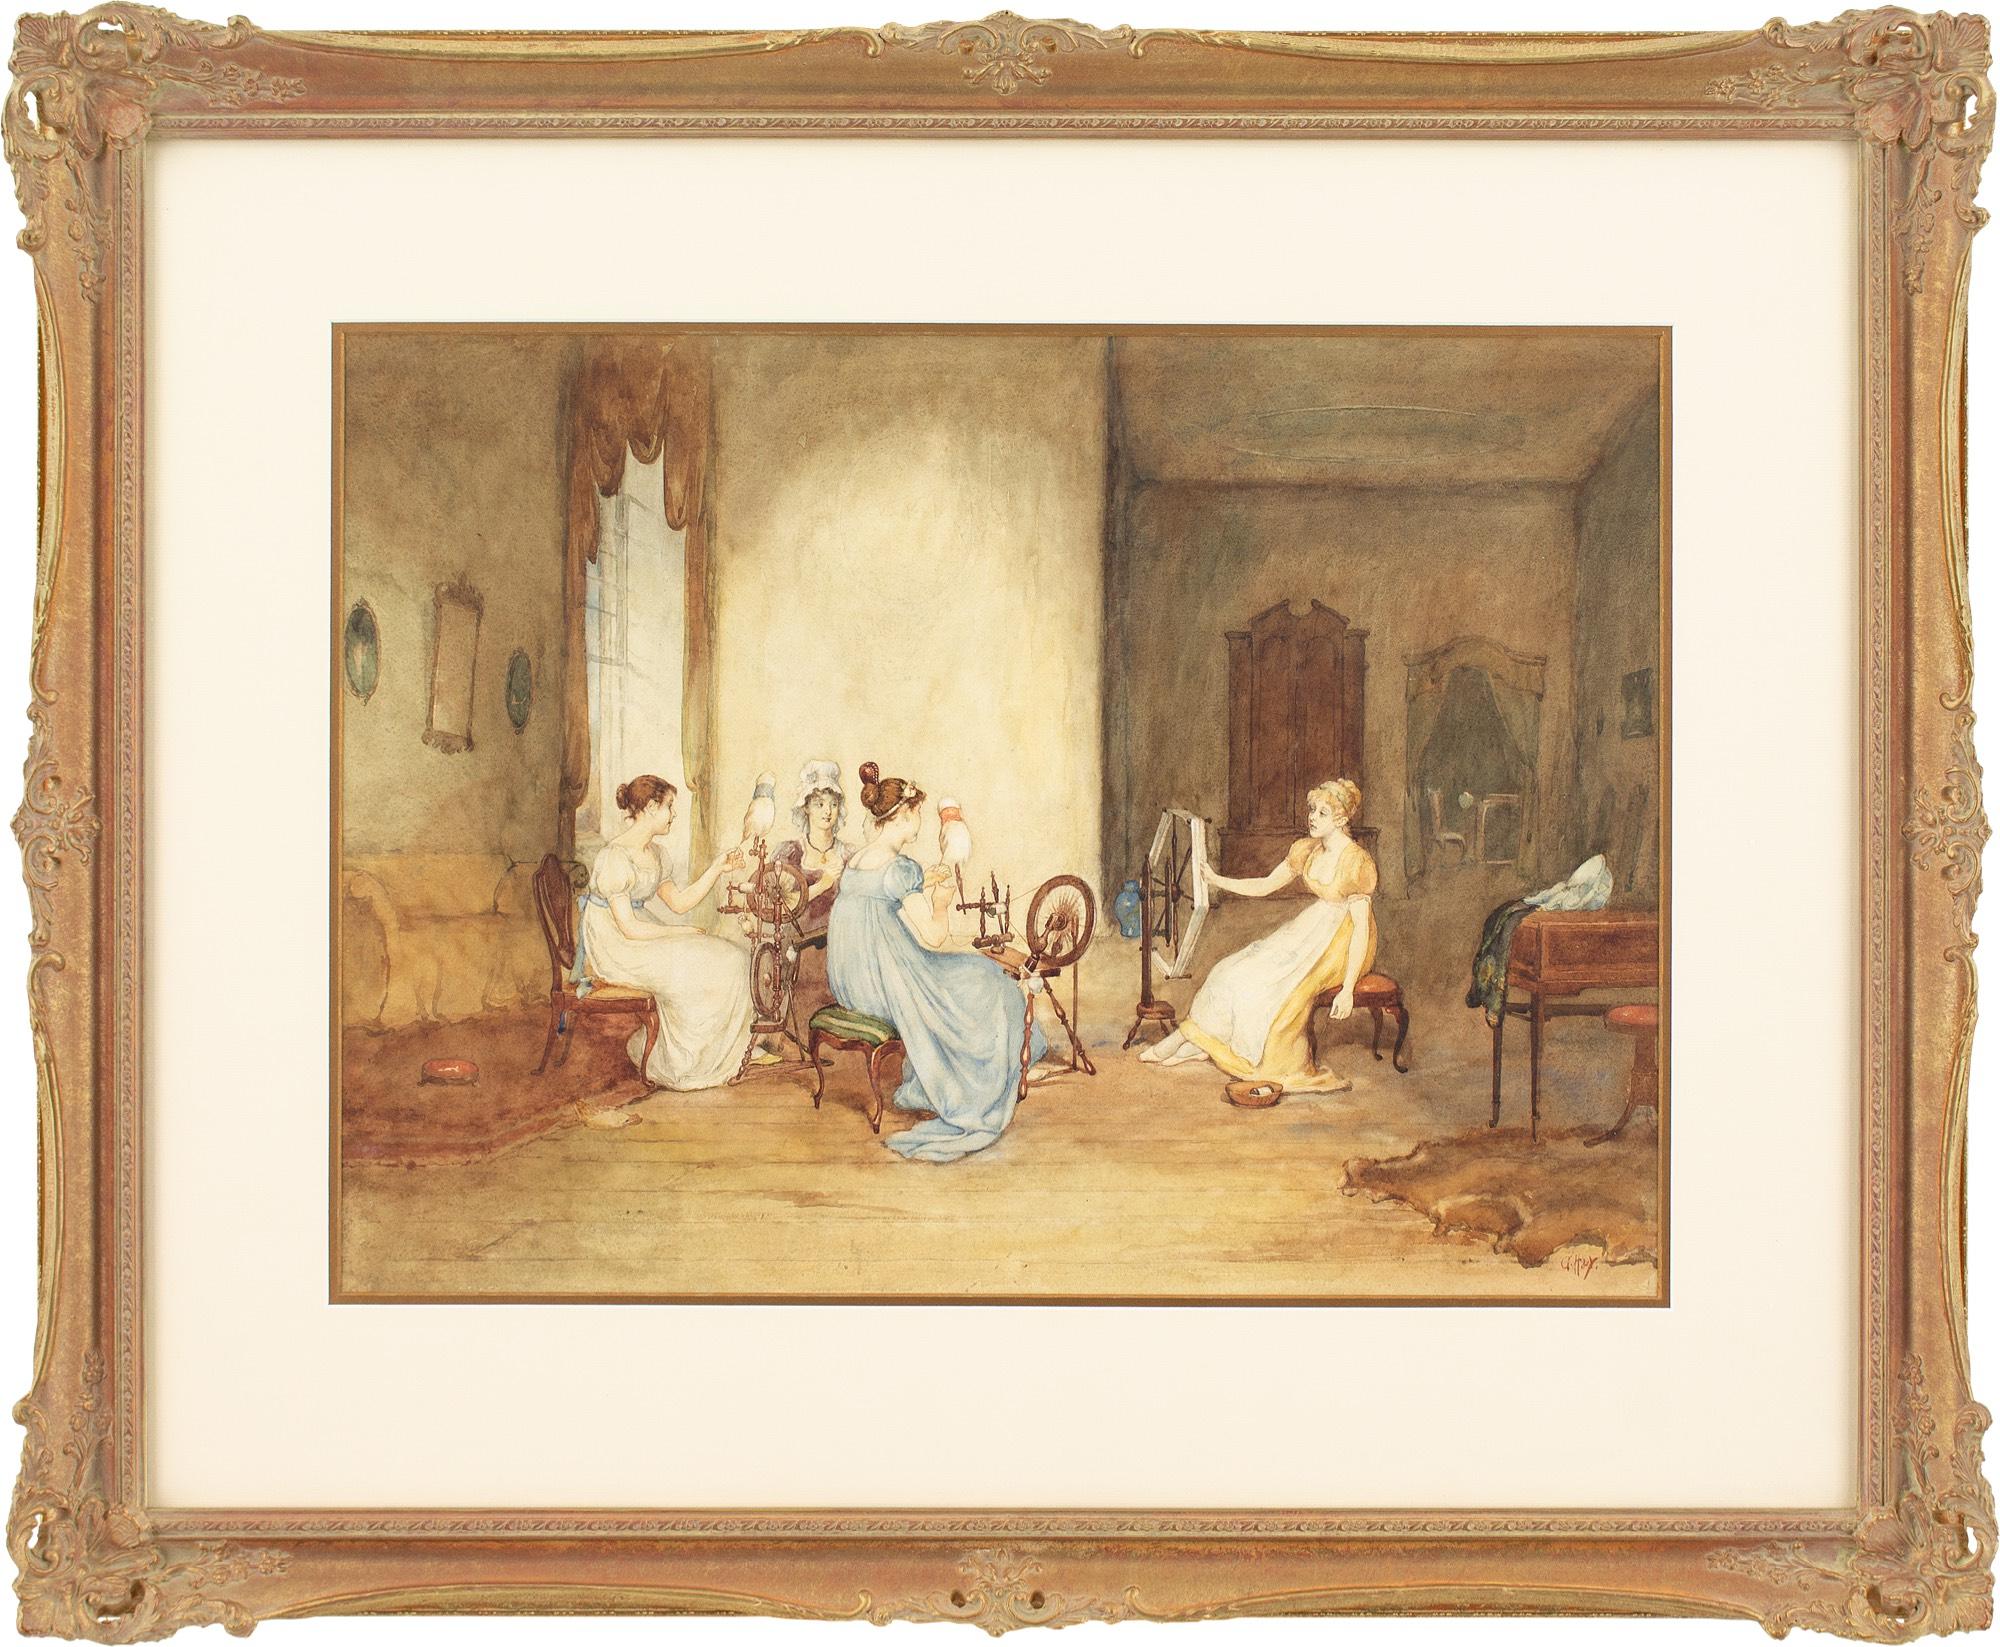 This late 19th-century watercolour by Scottish artist George H Hay RSA (1831-1912) depicts four young ladies, wearing outfits synonymous with the 1820s, spinning wool within a simple interior.

George H Hay RSA was a figure painter predominantly